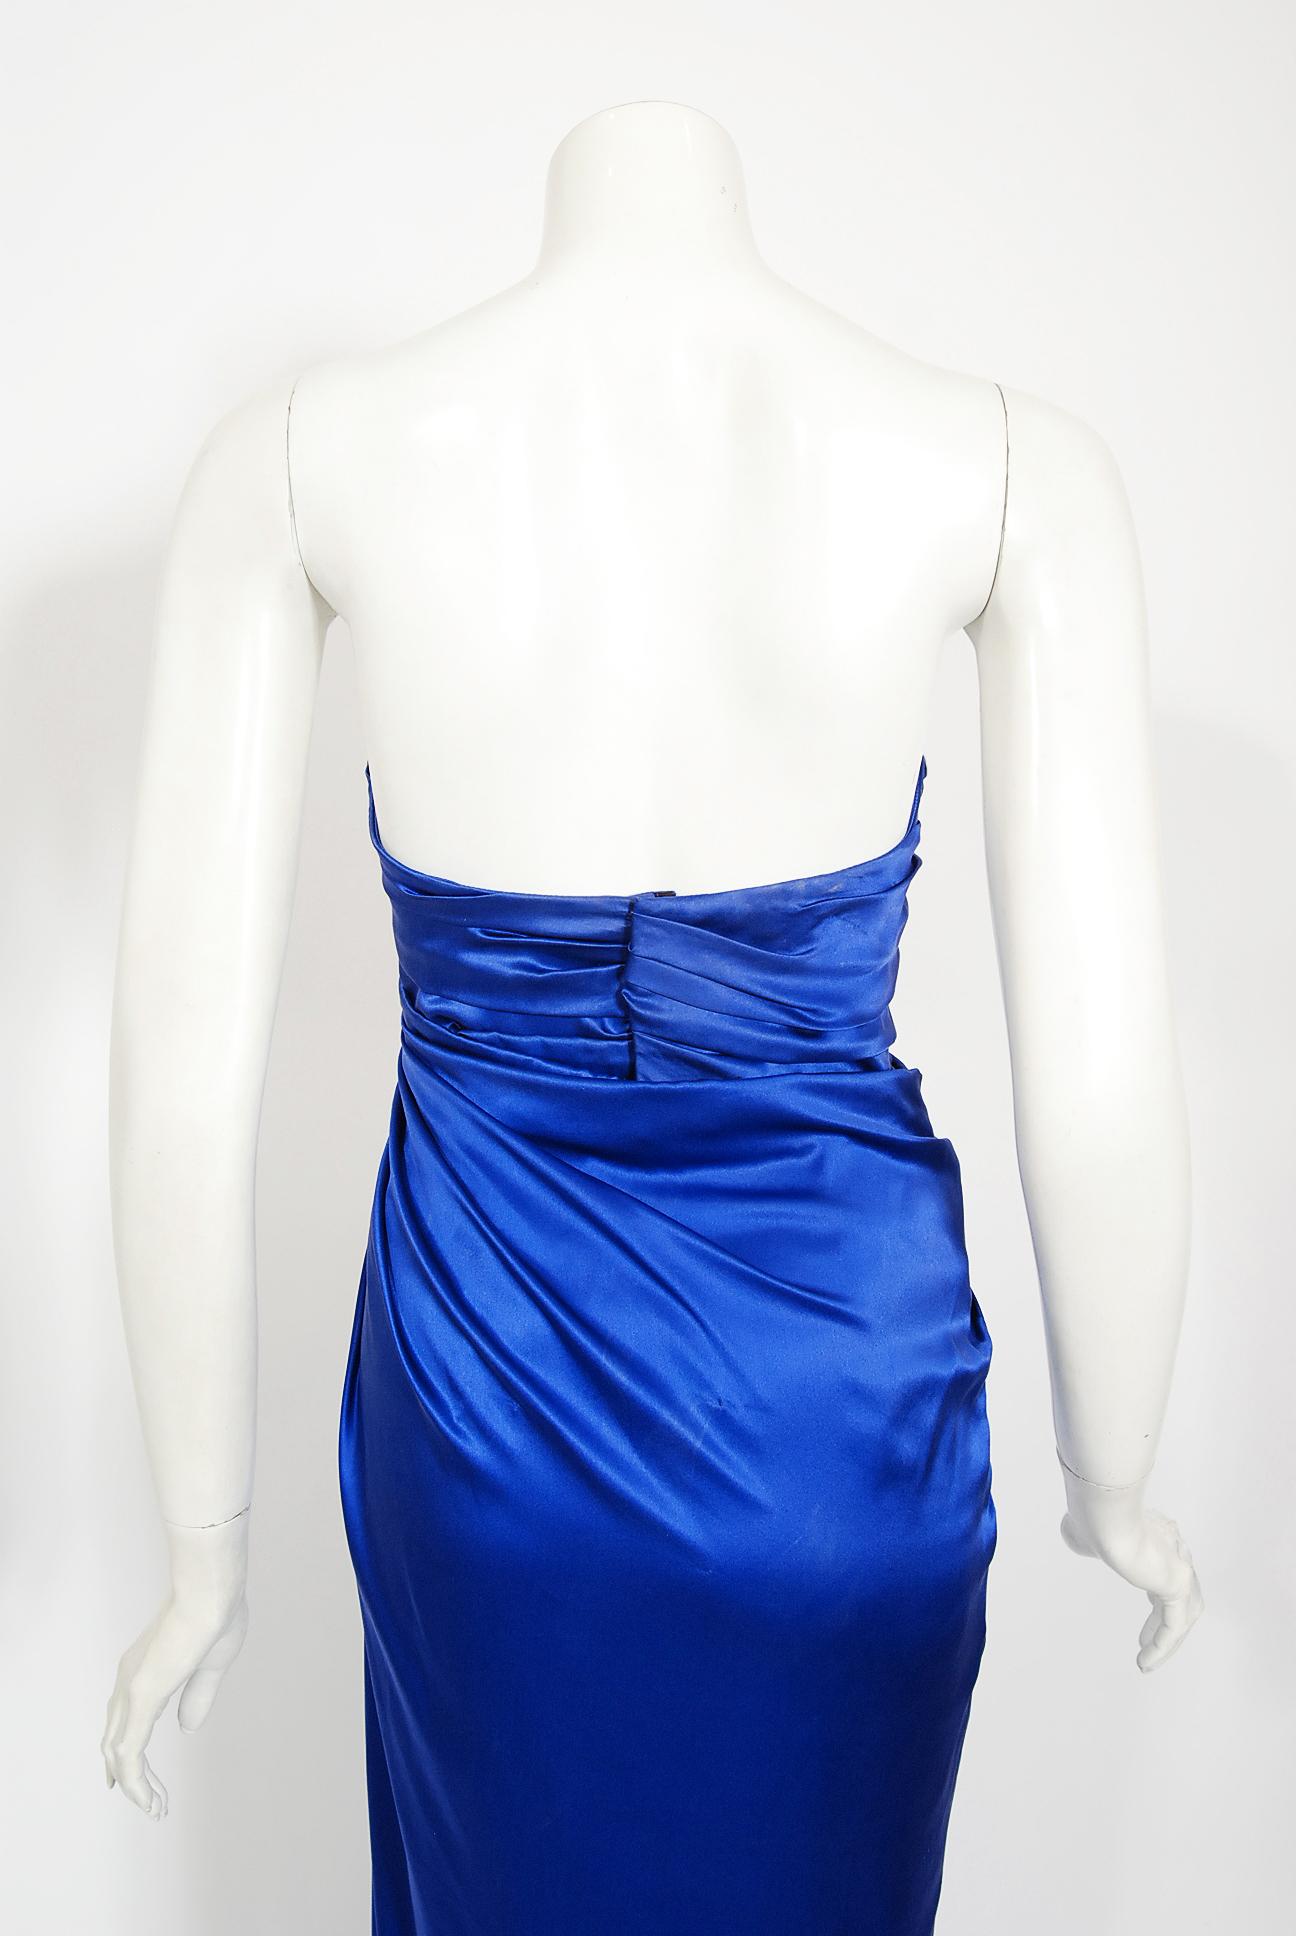 Iconic 1990 Thierry Mugler Documented Sapphire Blue Silk Corset Strapless Gown For Sale 5